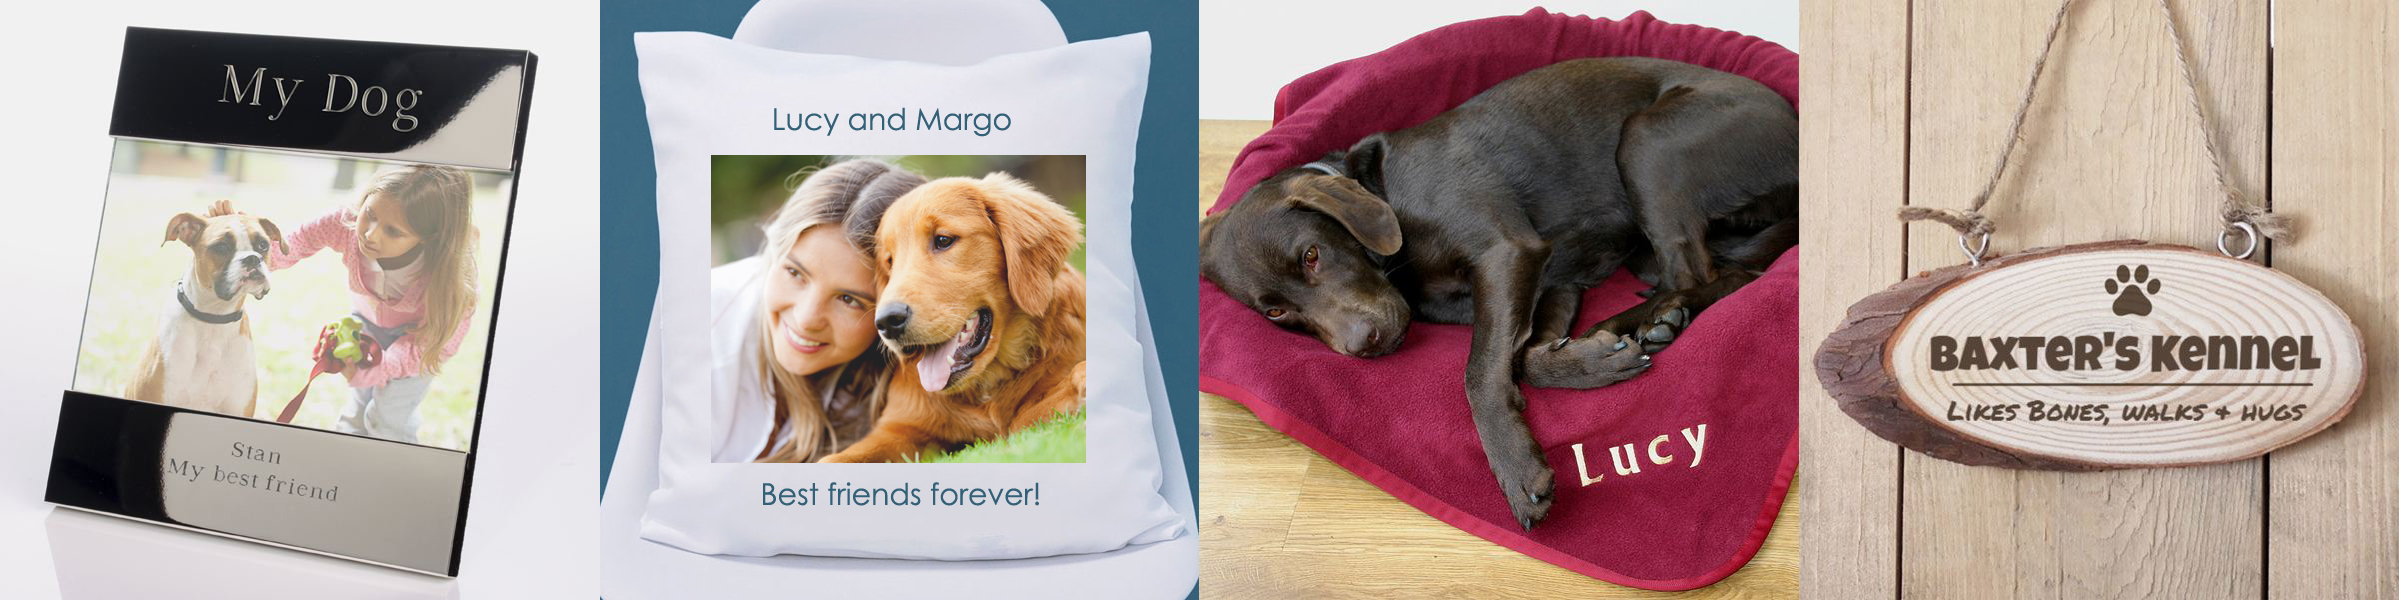 Personalised gifts for Dog lovers